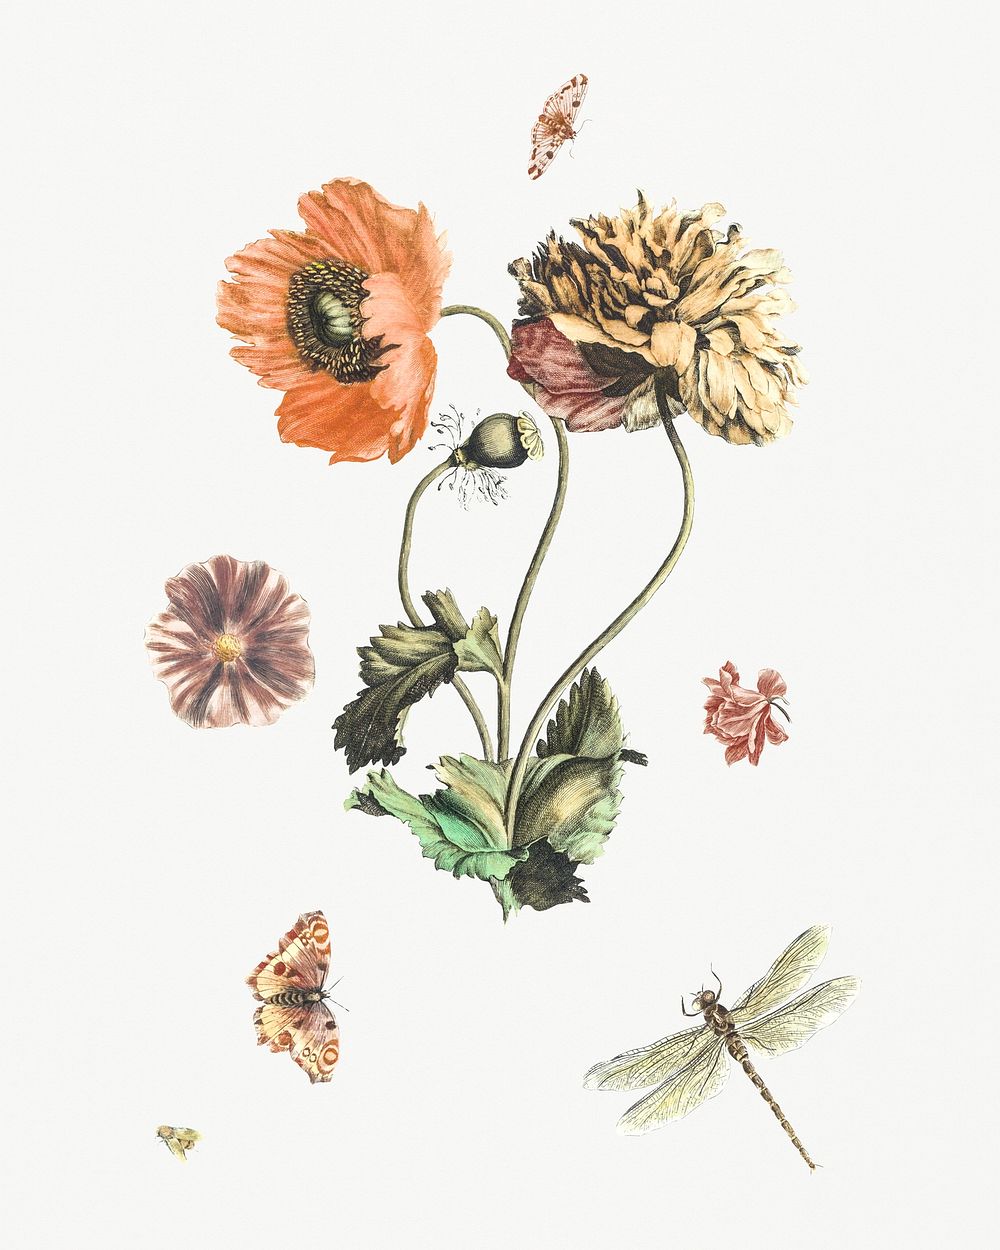 Three poppies, two butterflies, a fly and a dragonfly by Johan Teyler (1648-1709). Original from Rijks Museum. Digitally…